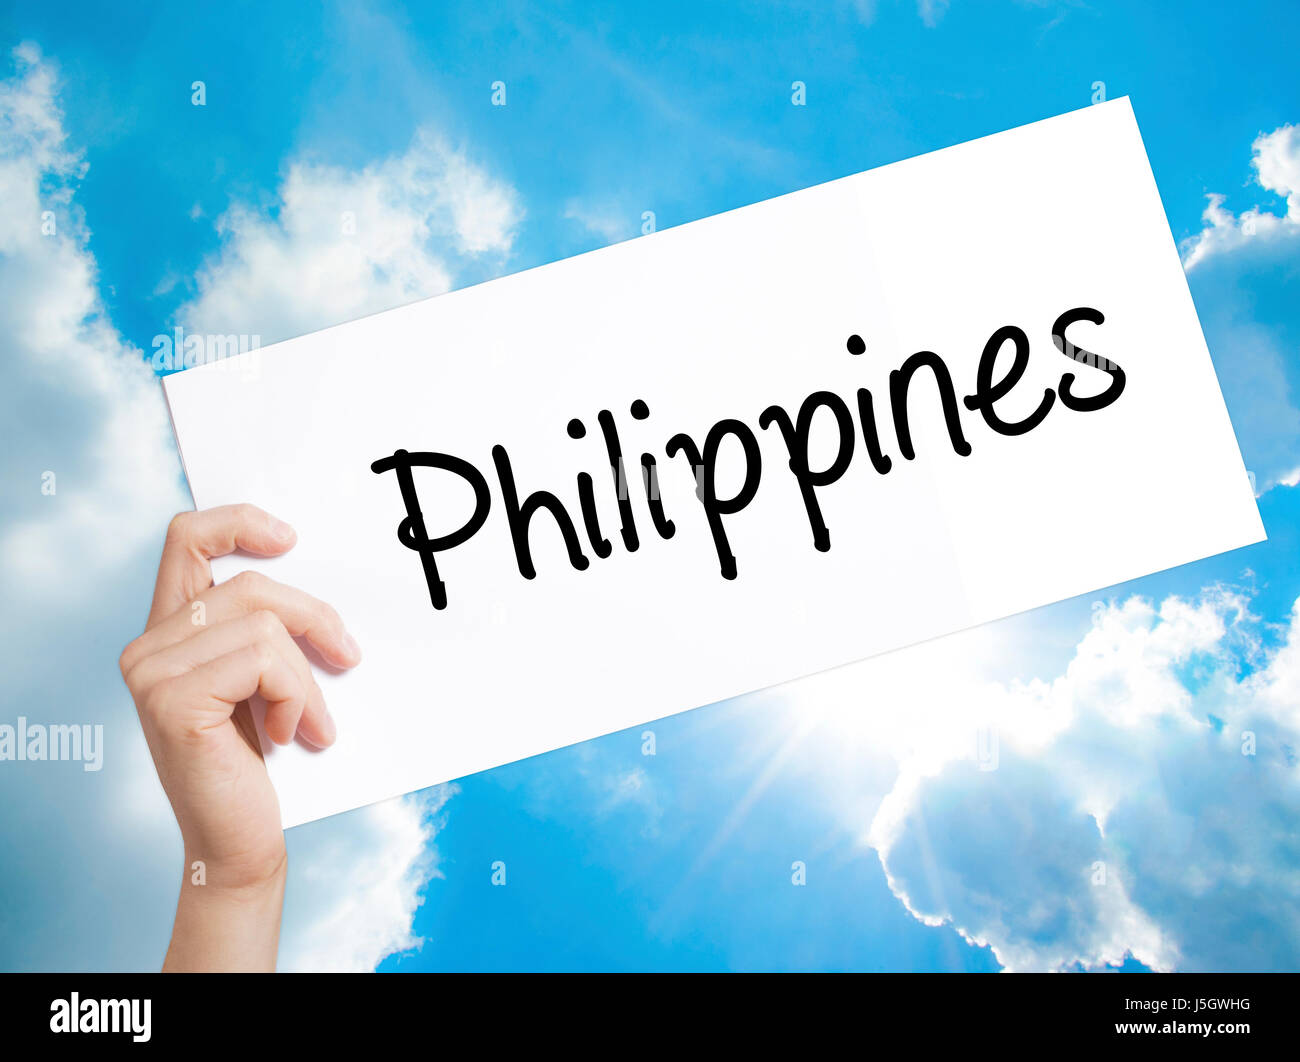 Philippines Sign on white paper. Man Hand Holding Paper with text. Isolated on sky background.   Business concept. Stock Photo Stock Photo